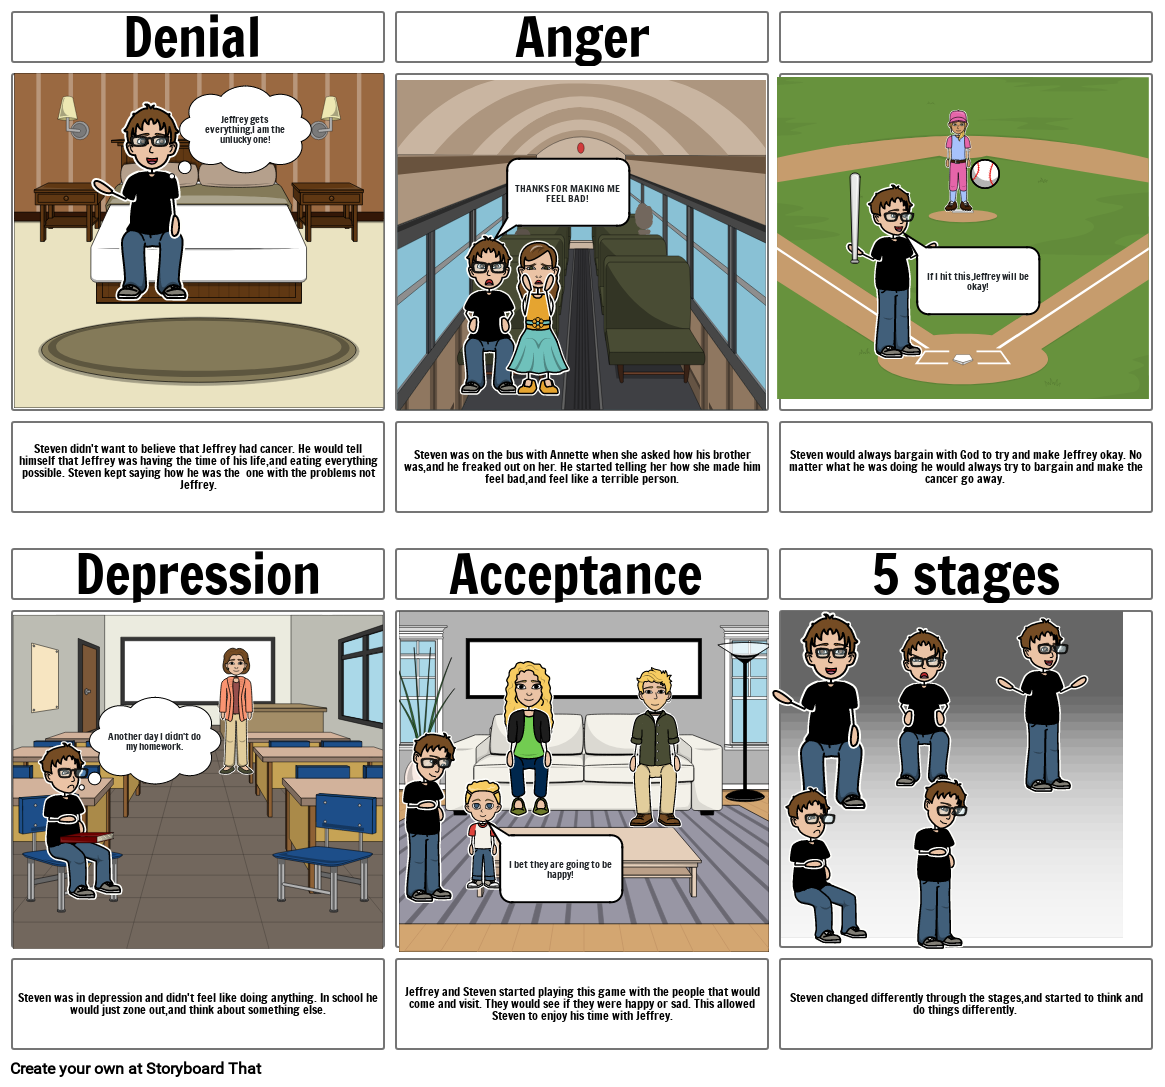 Steven`s Stages of Grief